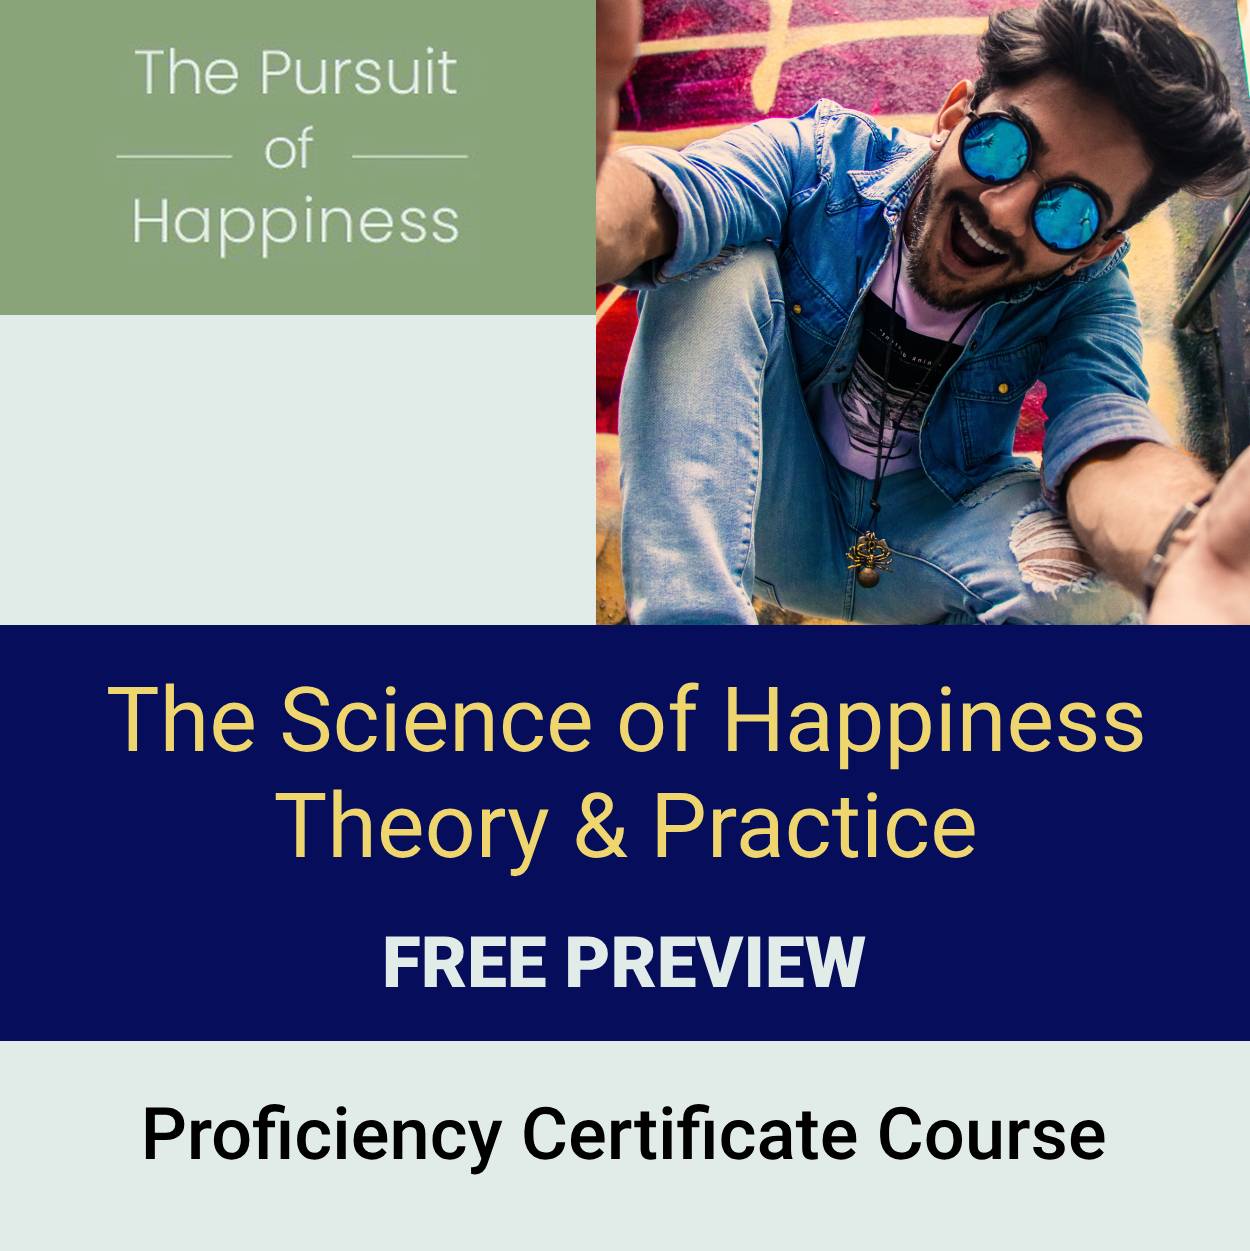 The Science of Happiness Proficiency Certificate Course